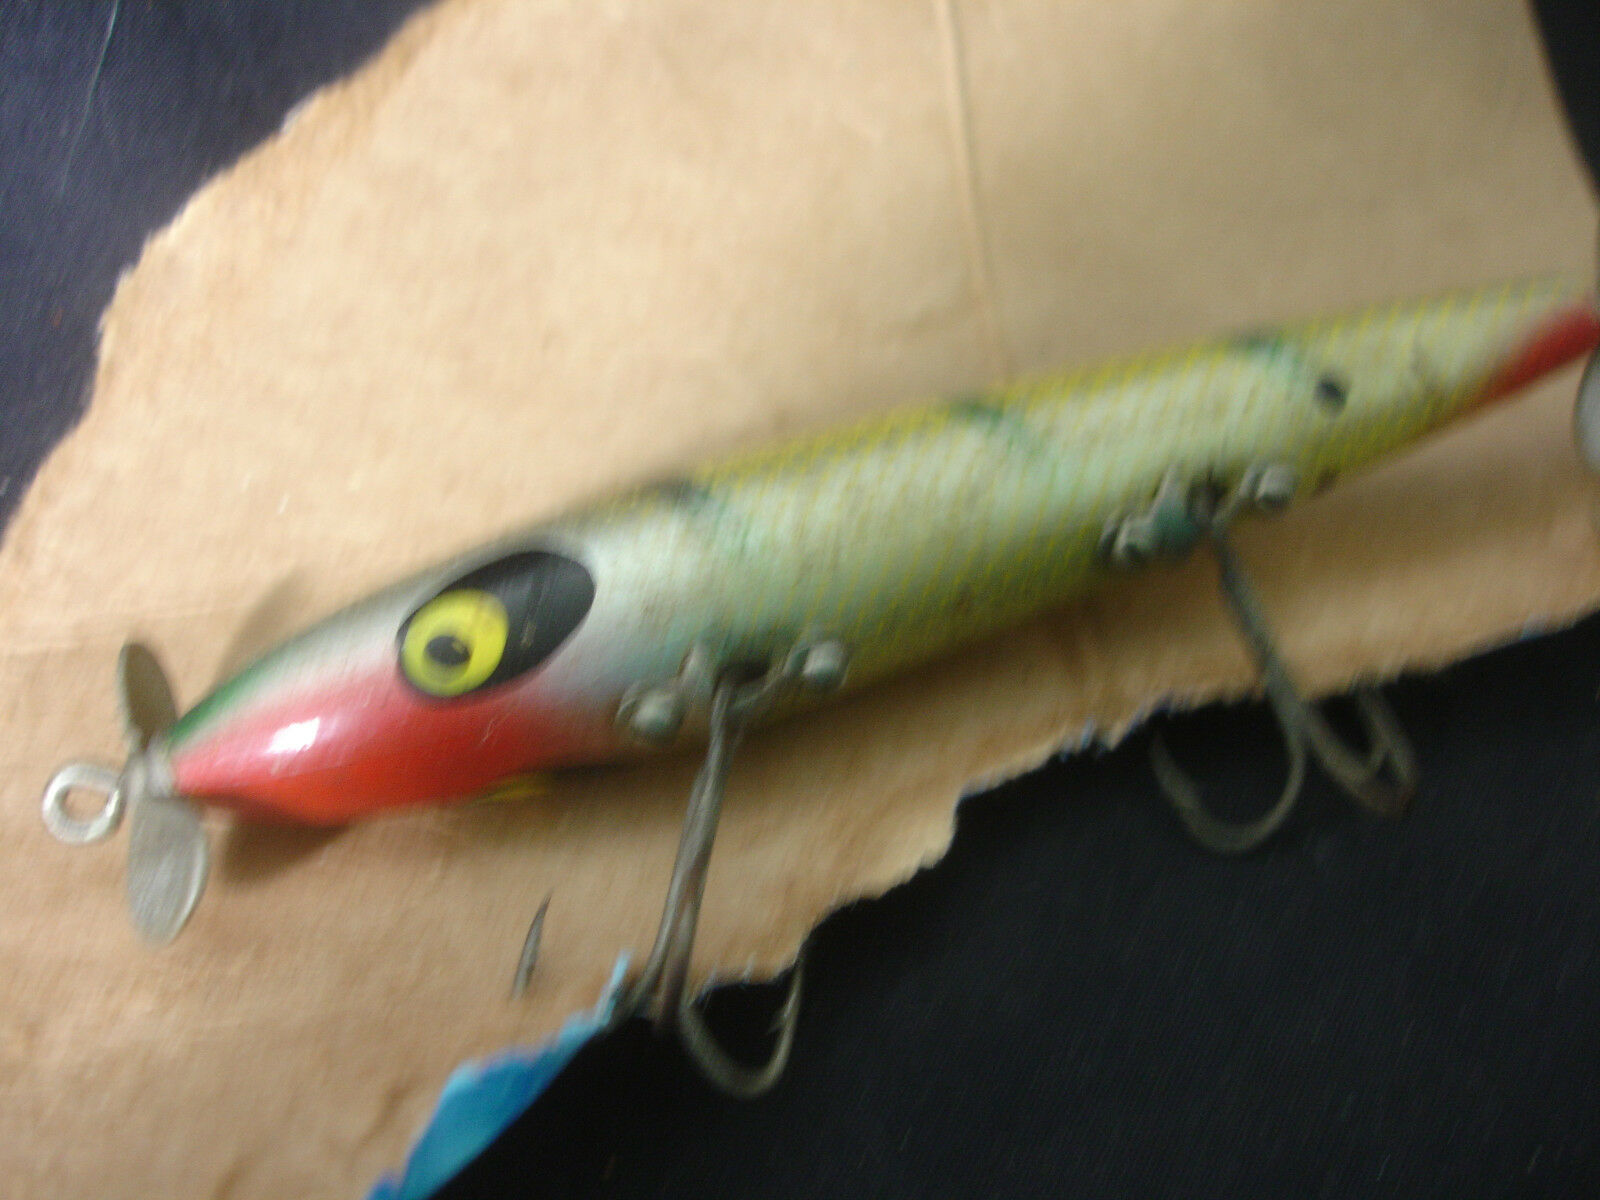 Old vtg Collectible Devil Horse Fishing Lure Green, Yellow Red Hand Painted  Lure